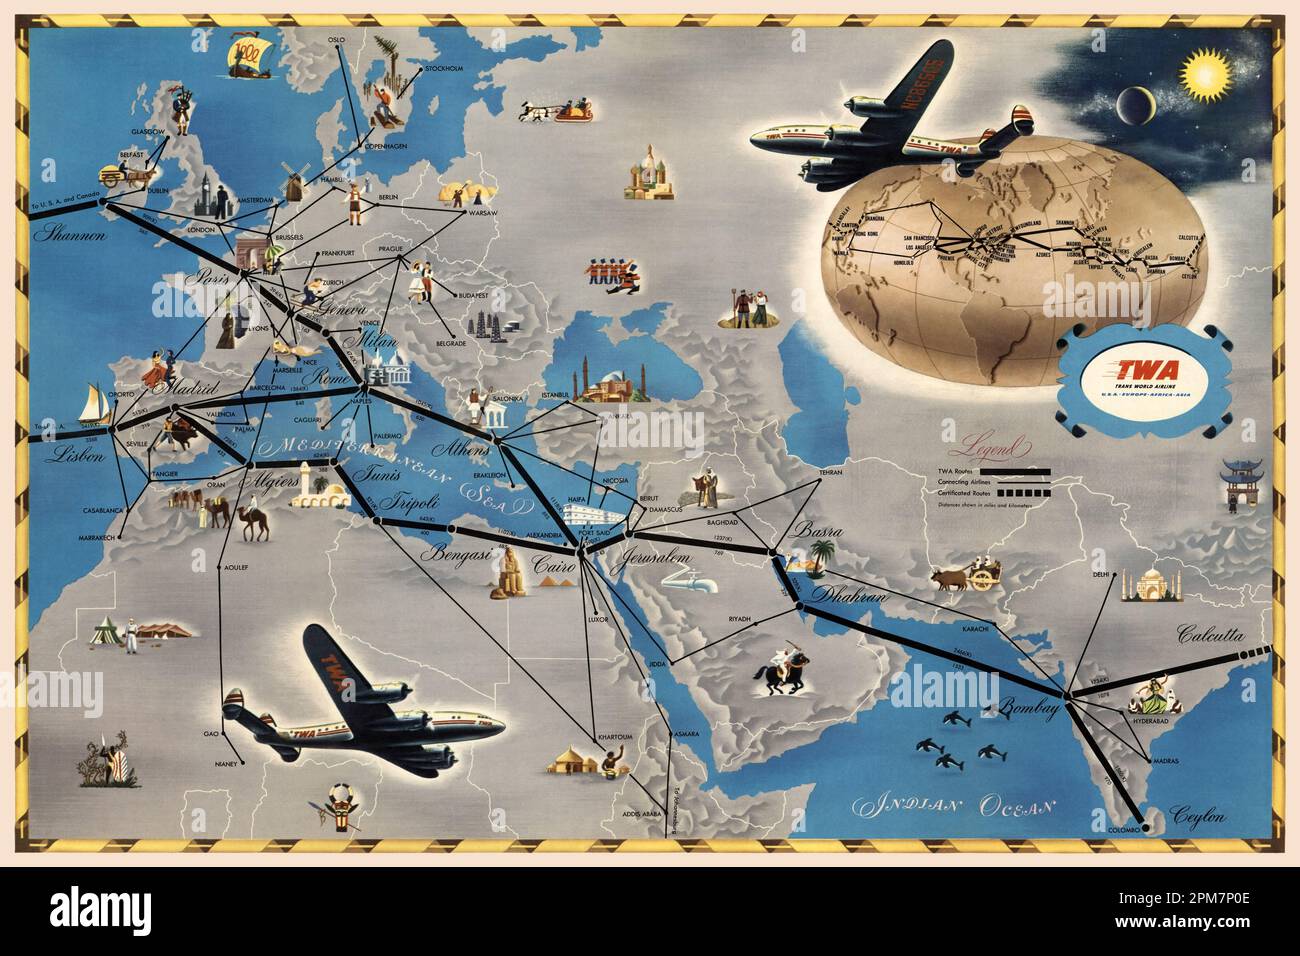 TWA Trans World Airline. U.S.A. Europe Africa Asia Air Routes. Artist unknown. Poster published in 1948 in the USA. Stock Photo